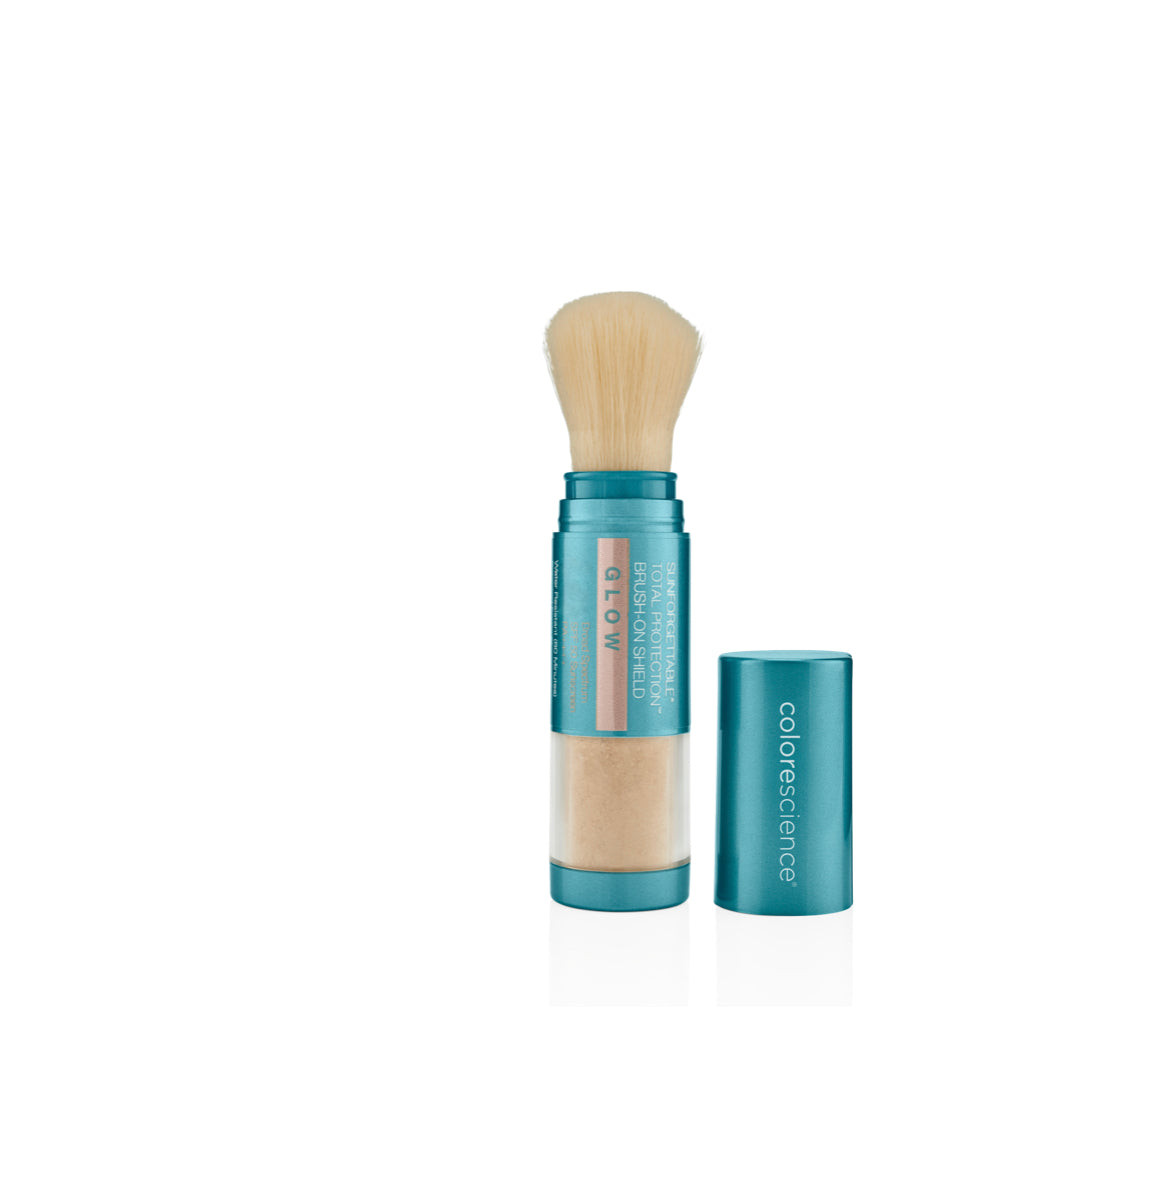 Colorescience Sunforgettable Brush-On Shield Glow